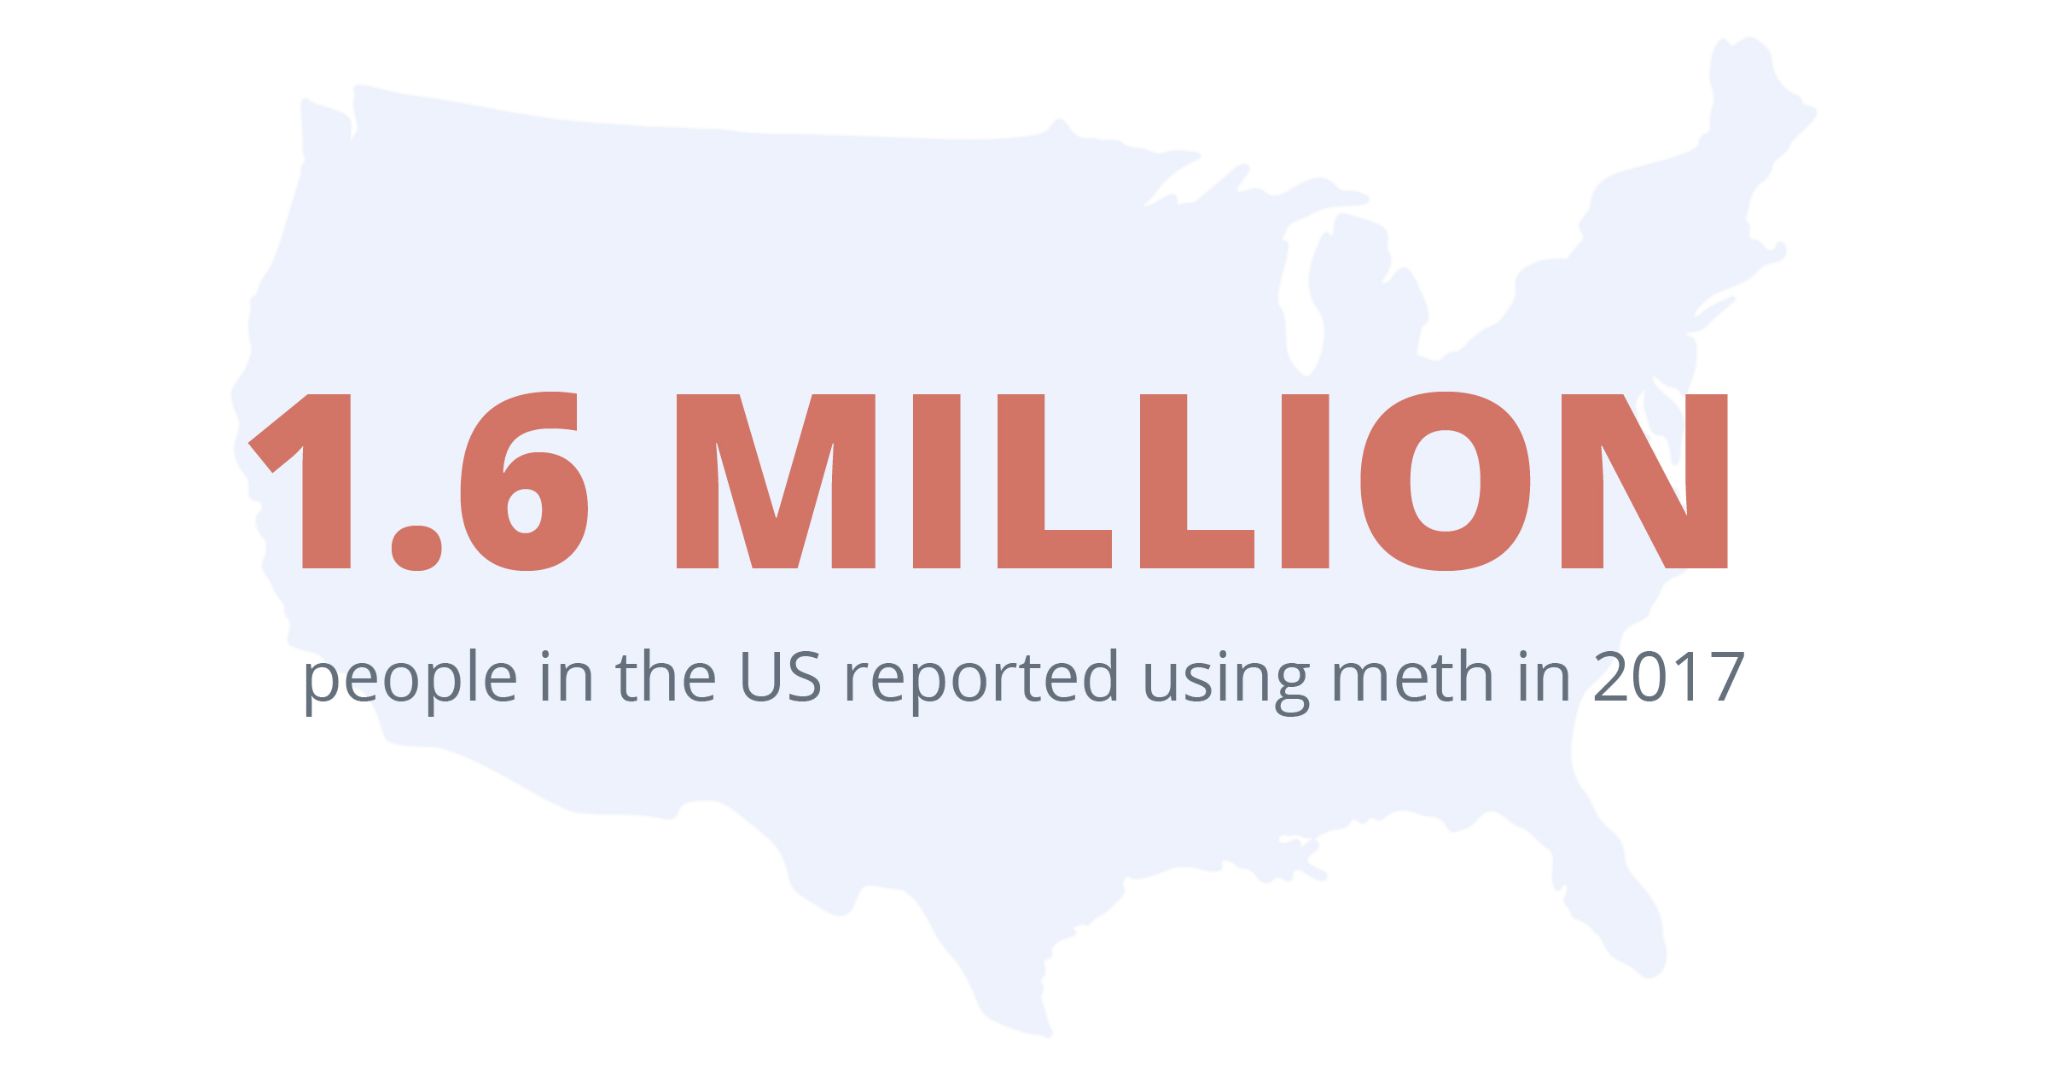 1.6 million people in the US reported using meth in 2017